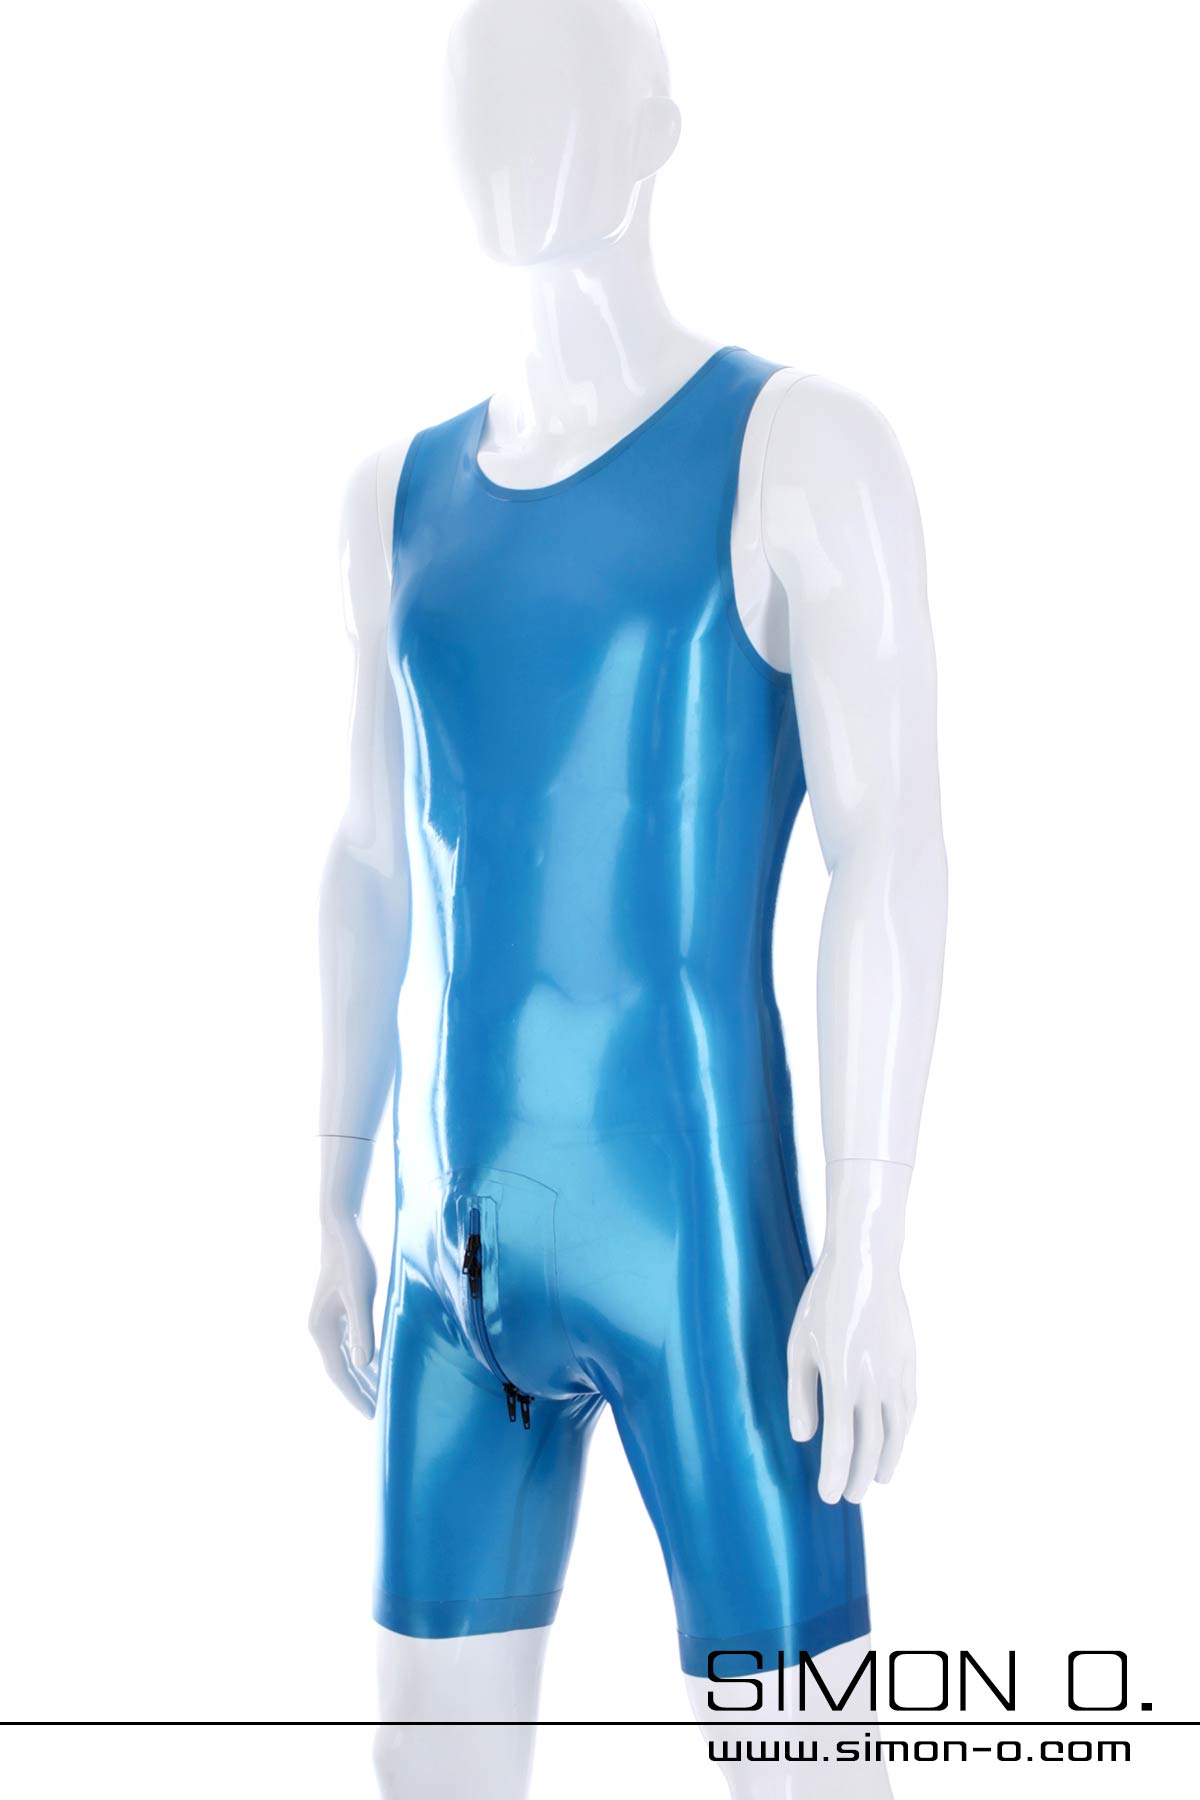 Sleeveless Men Latex Surfsuit in blue seen from behind